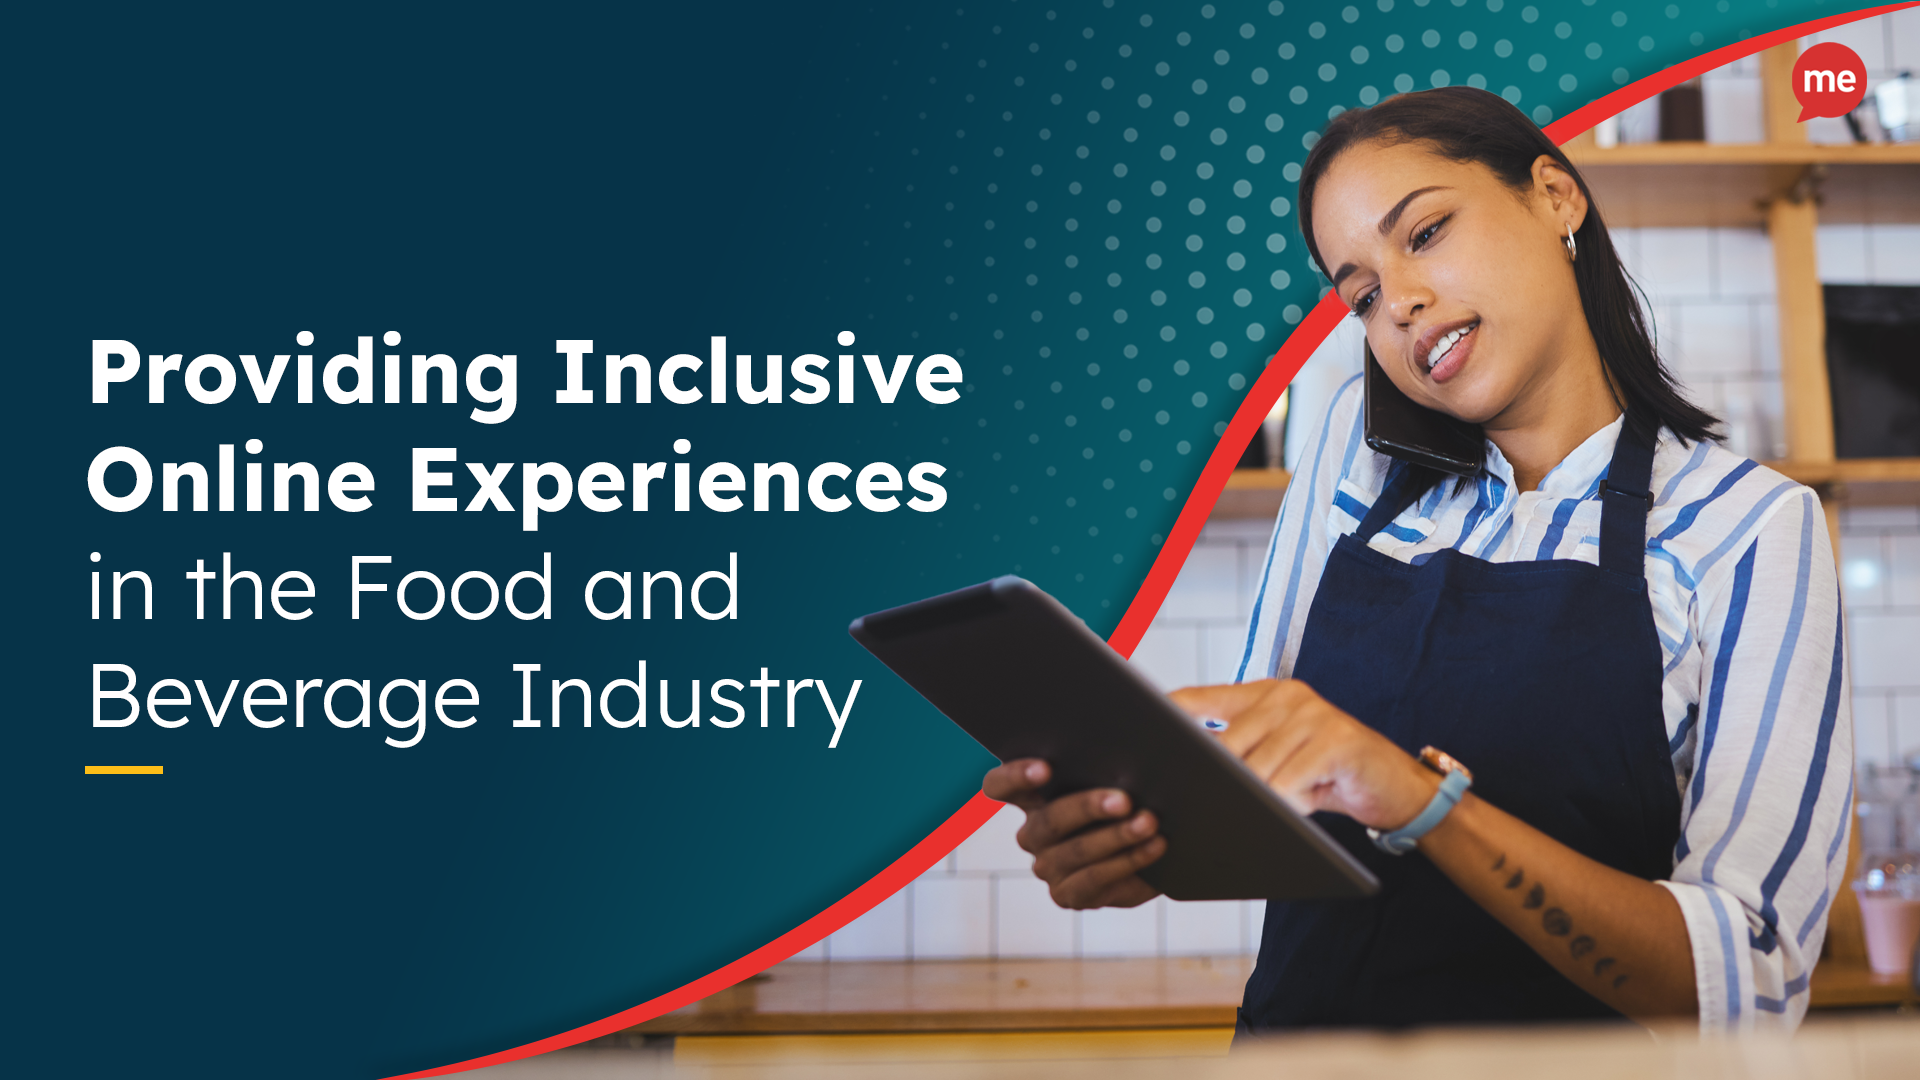 Providing Inclusive Online Experiences in the Food and Beverage Industry